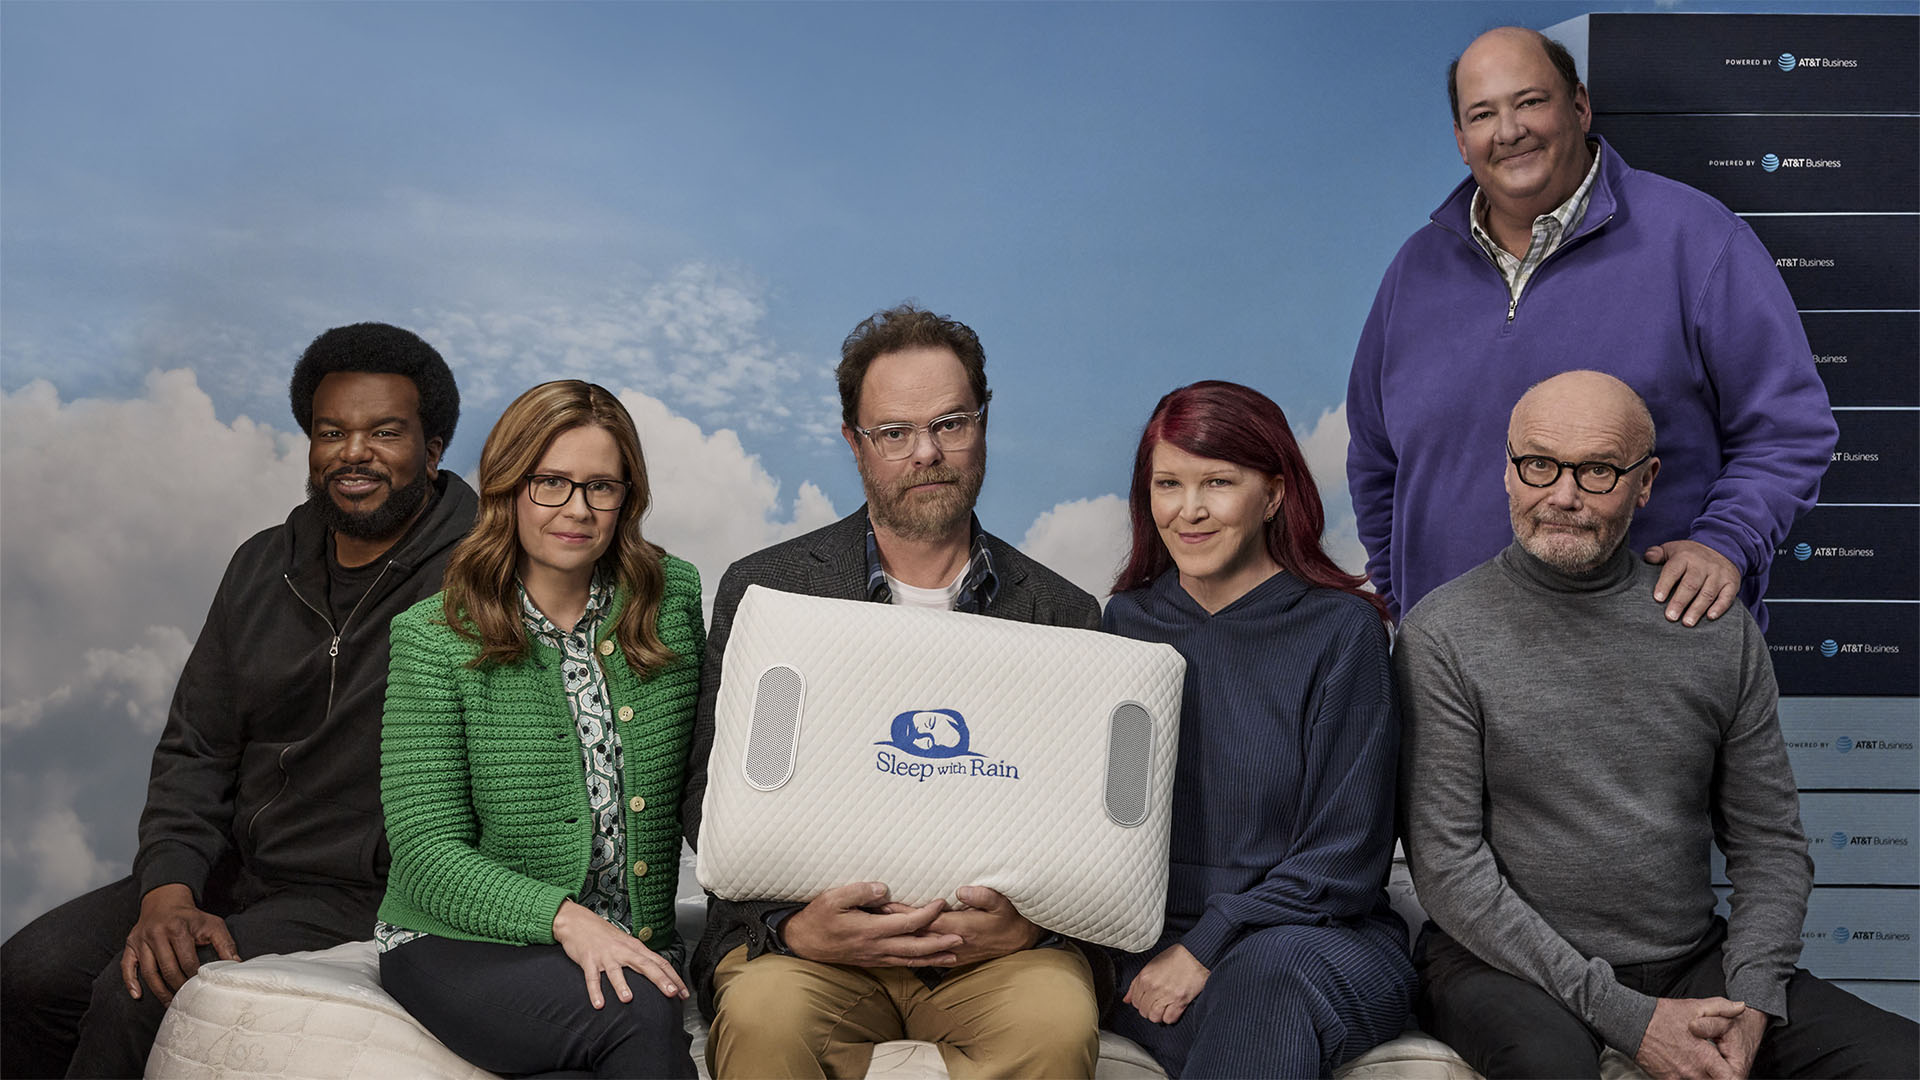 The cast of The Office reunites for an AT&T Business commercial